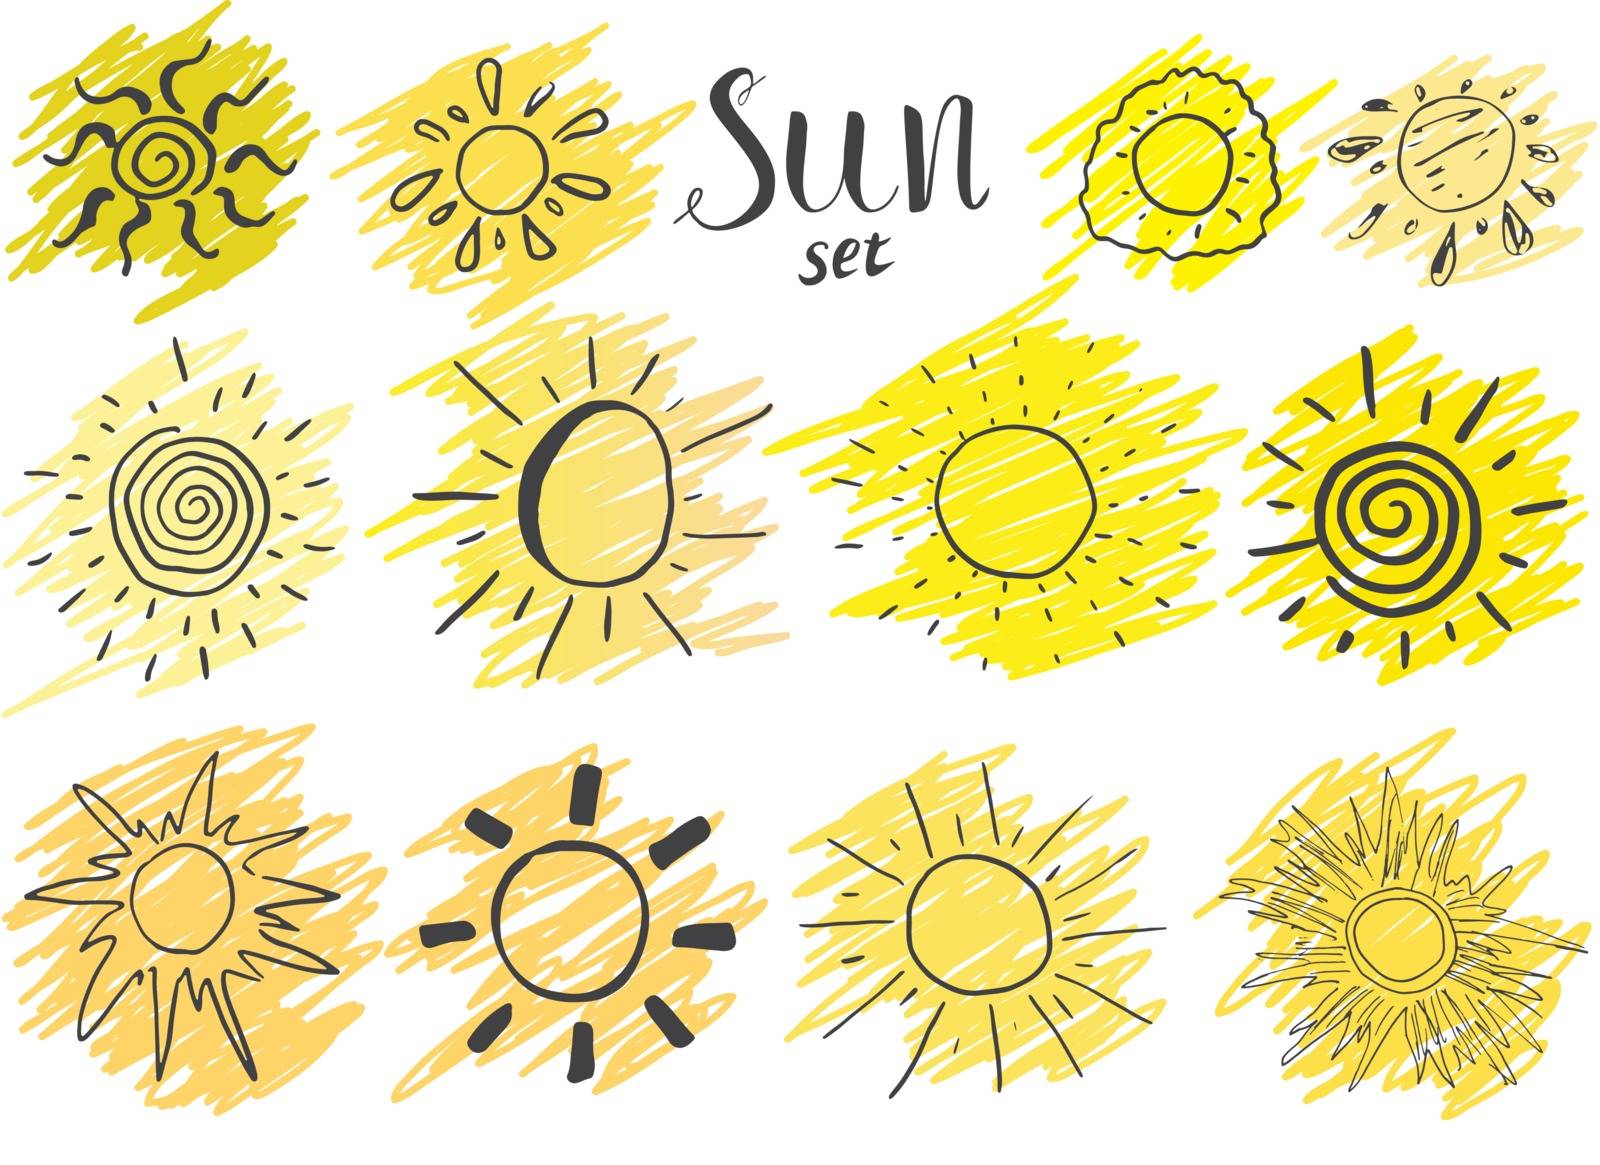 Hand drawn set of different suns, sketch vector illustration isolated on white